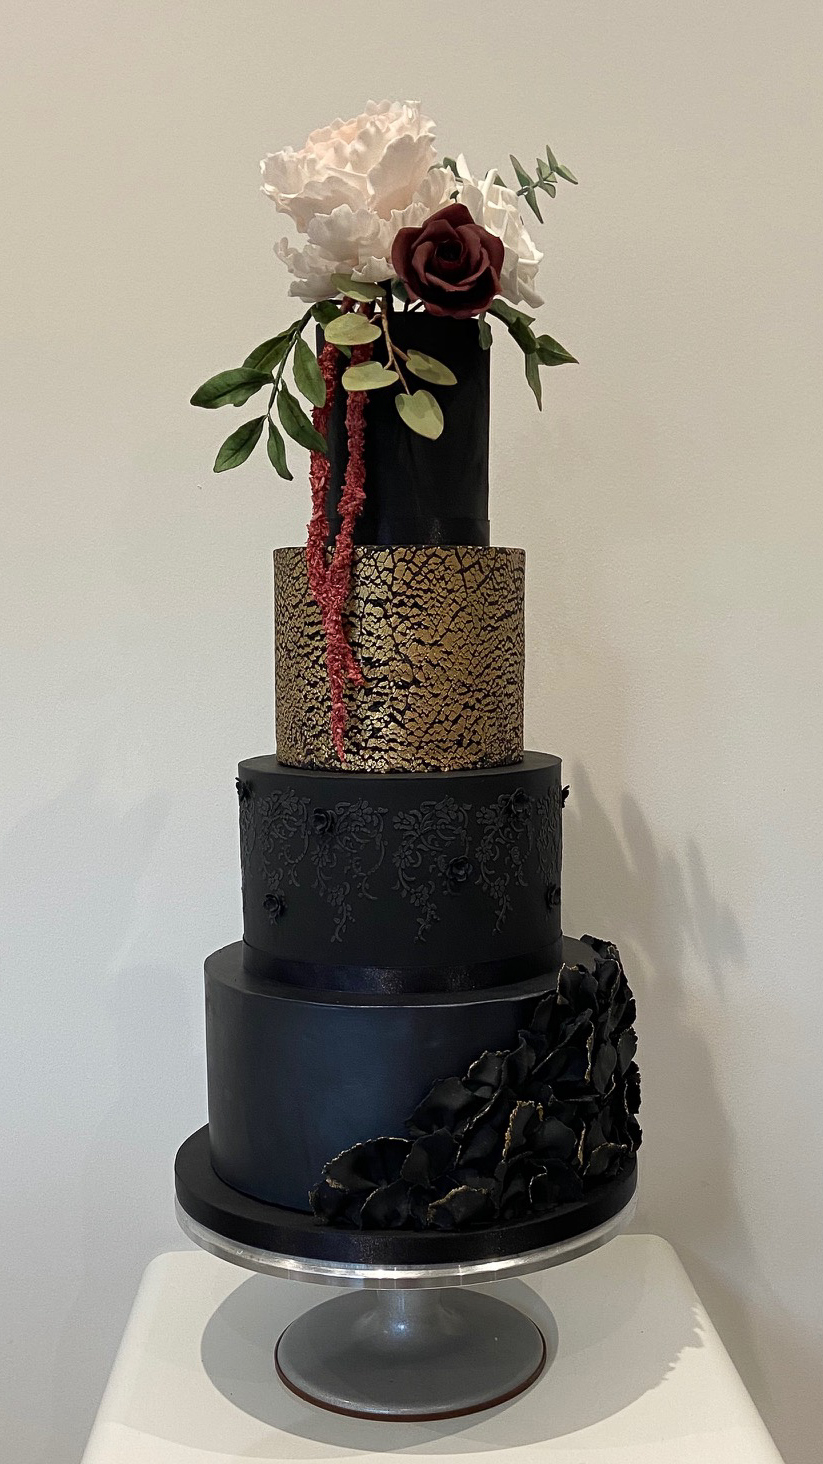 Four-tier black and gold wedding cake with textures and sugar flowers